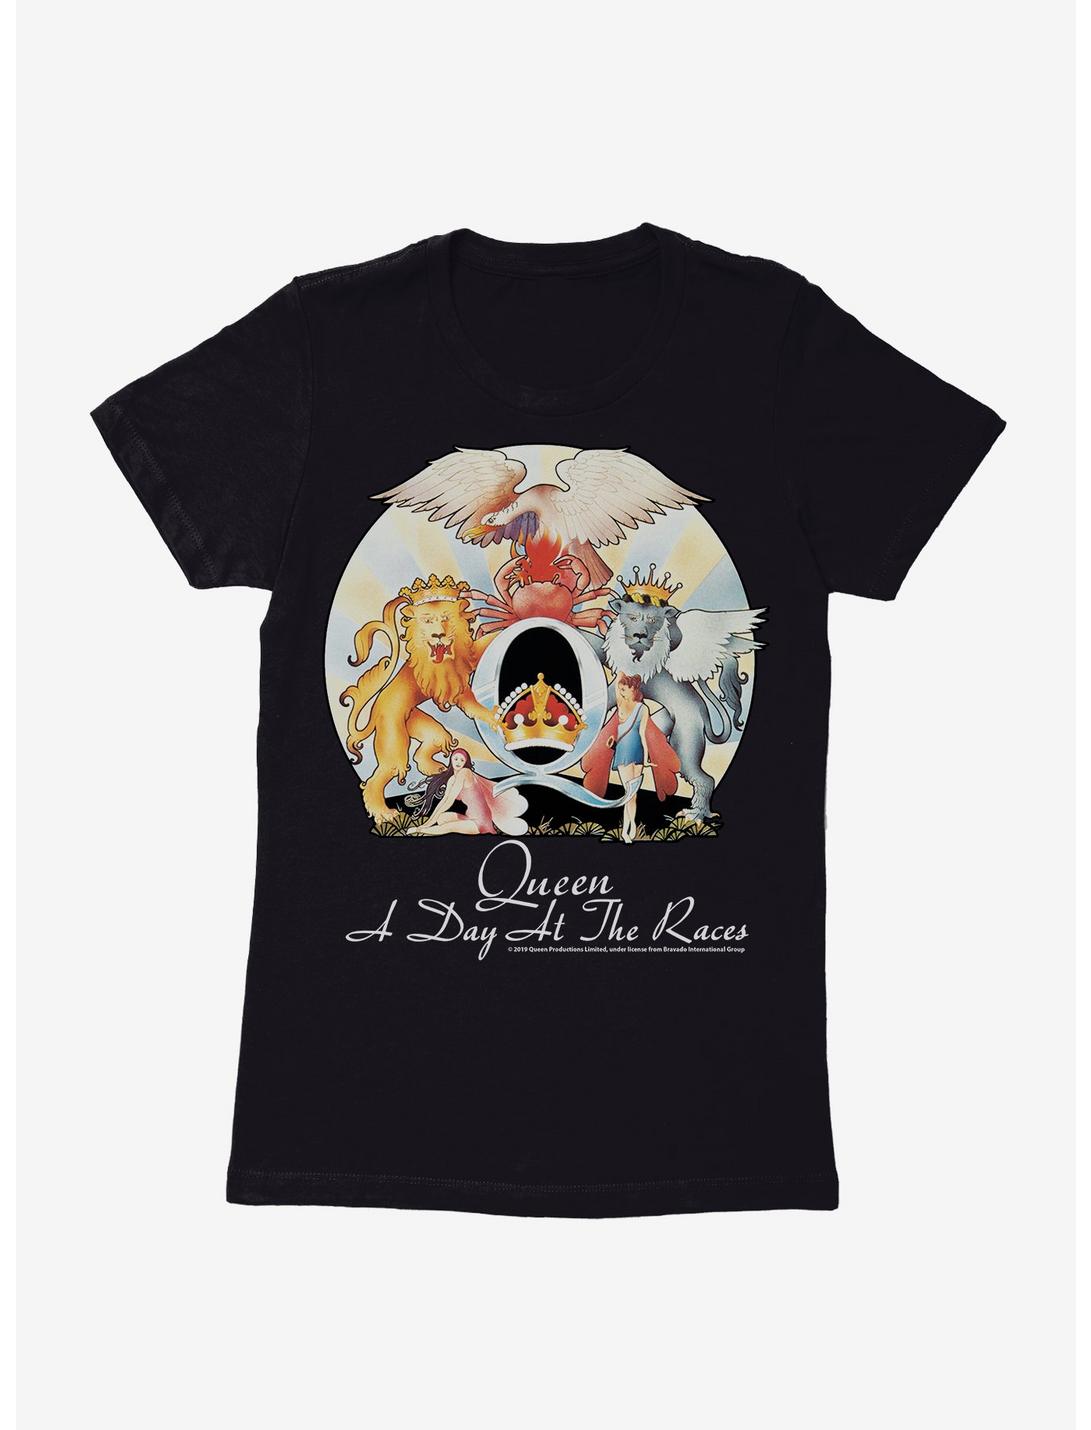 Queen A Day At The Races Womens T-Shirt, , hi-res